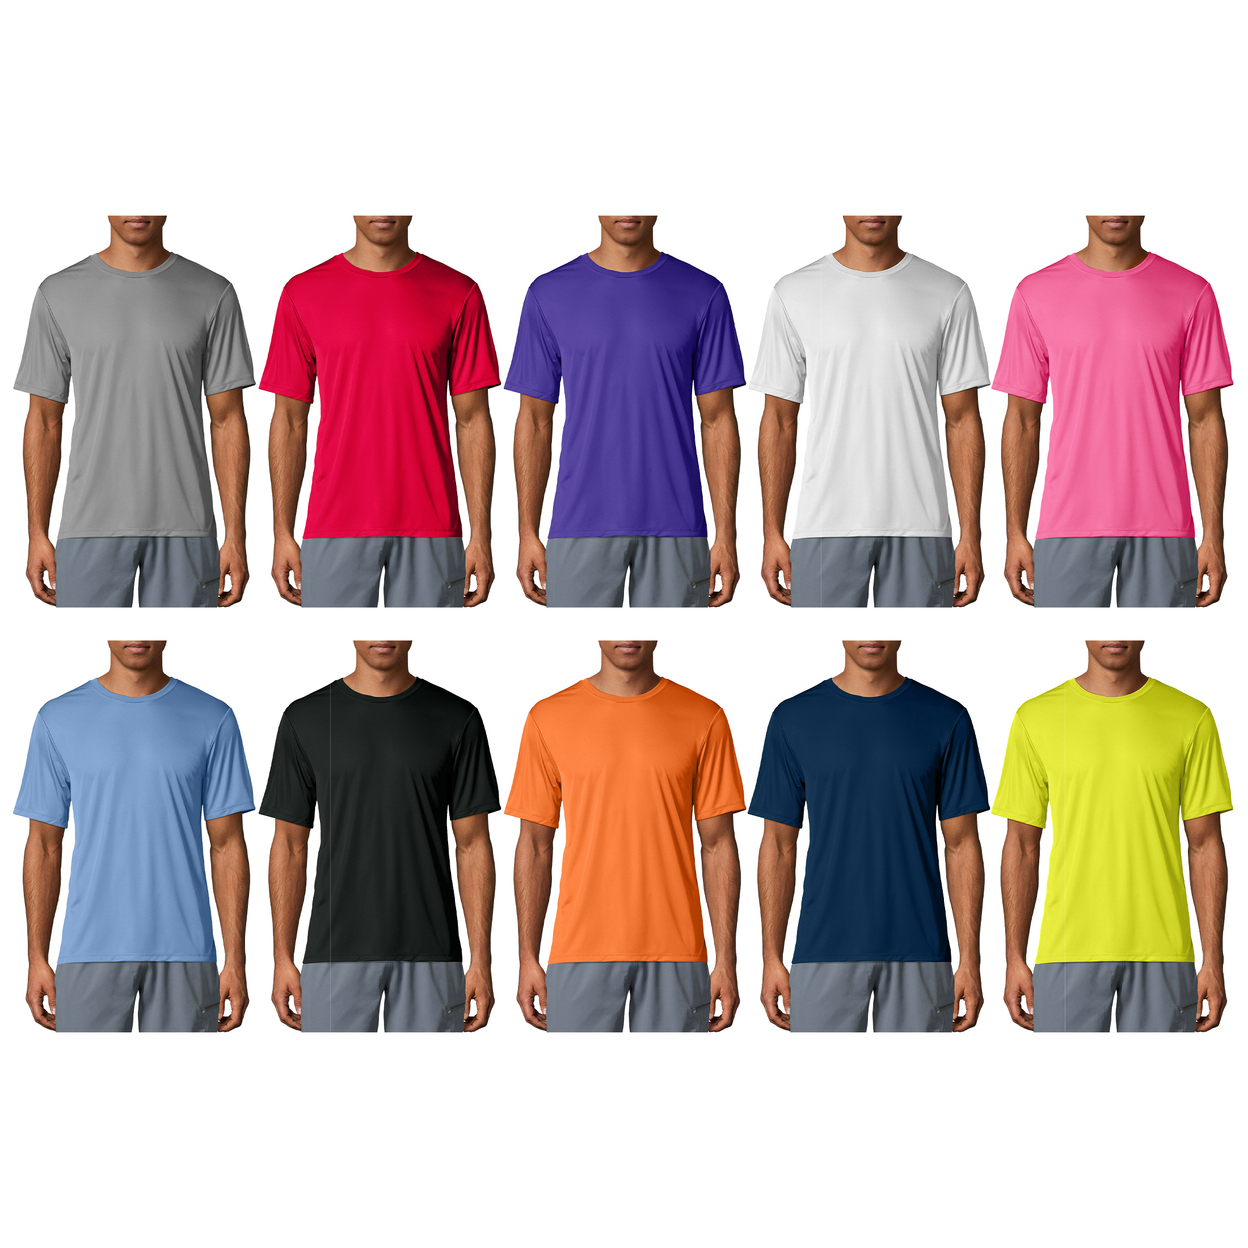 4-Pack: Men's Moisture Wicking Cool Dri-Fit Performance Short Sleeve Crew Neck T-Shirts - Large